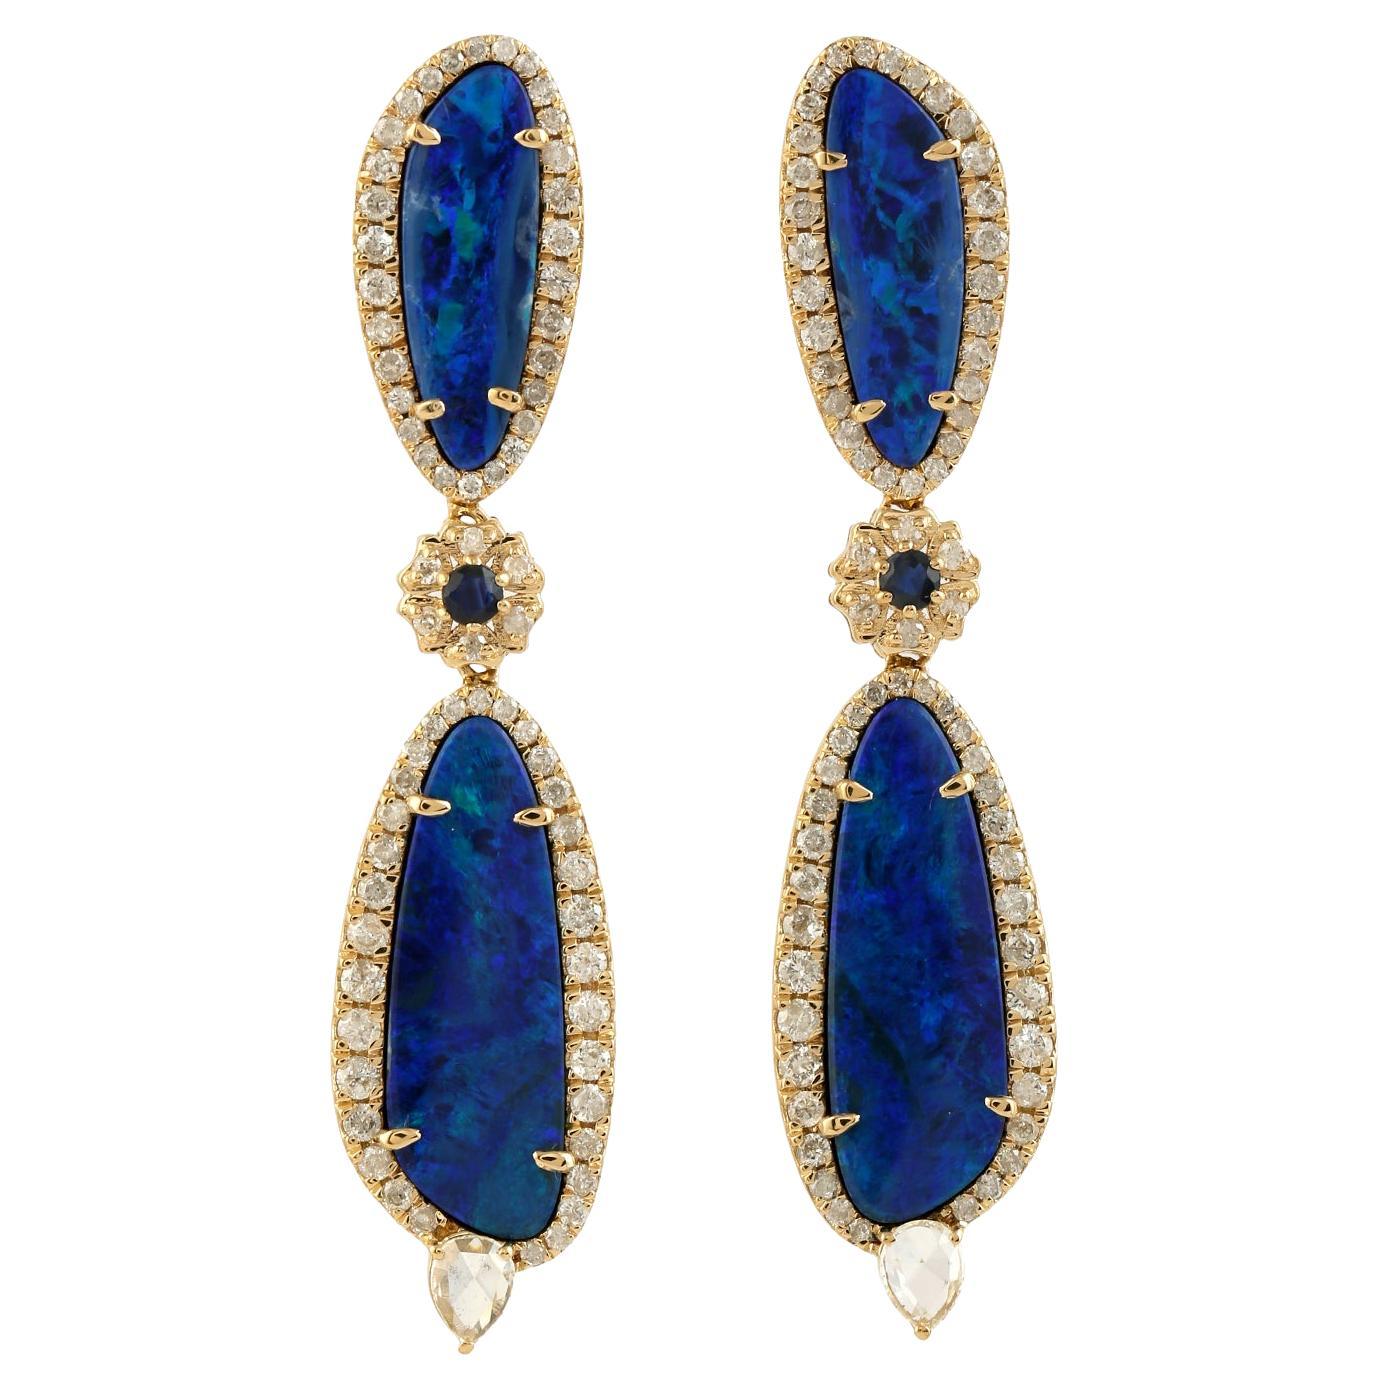 5.65 ct Opal Dangle Earrings With Sapphire & Diamonds Made In 18k Yellow Gold